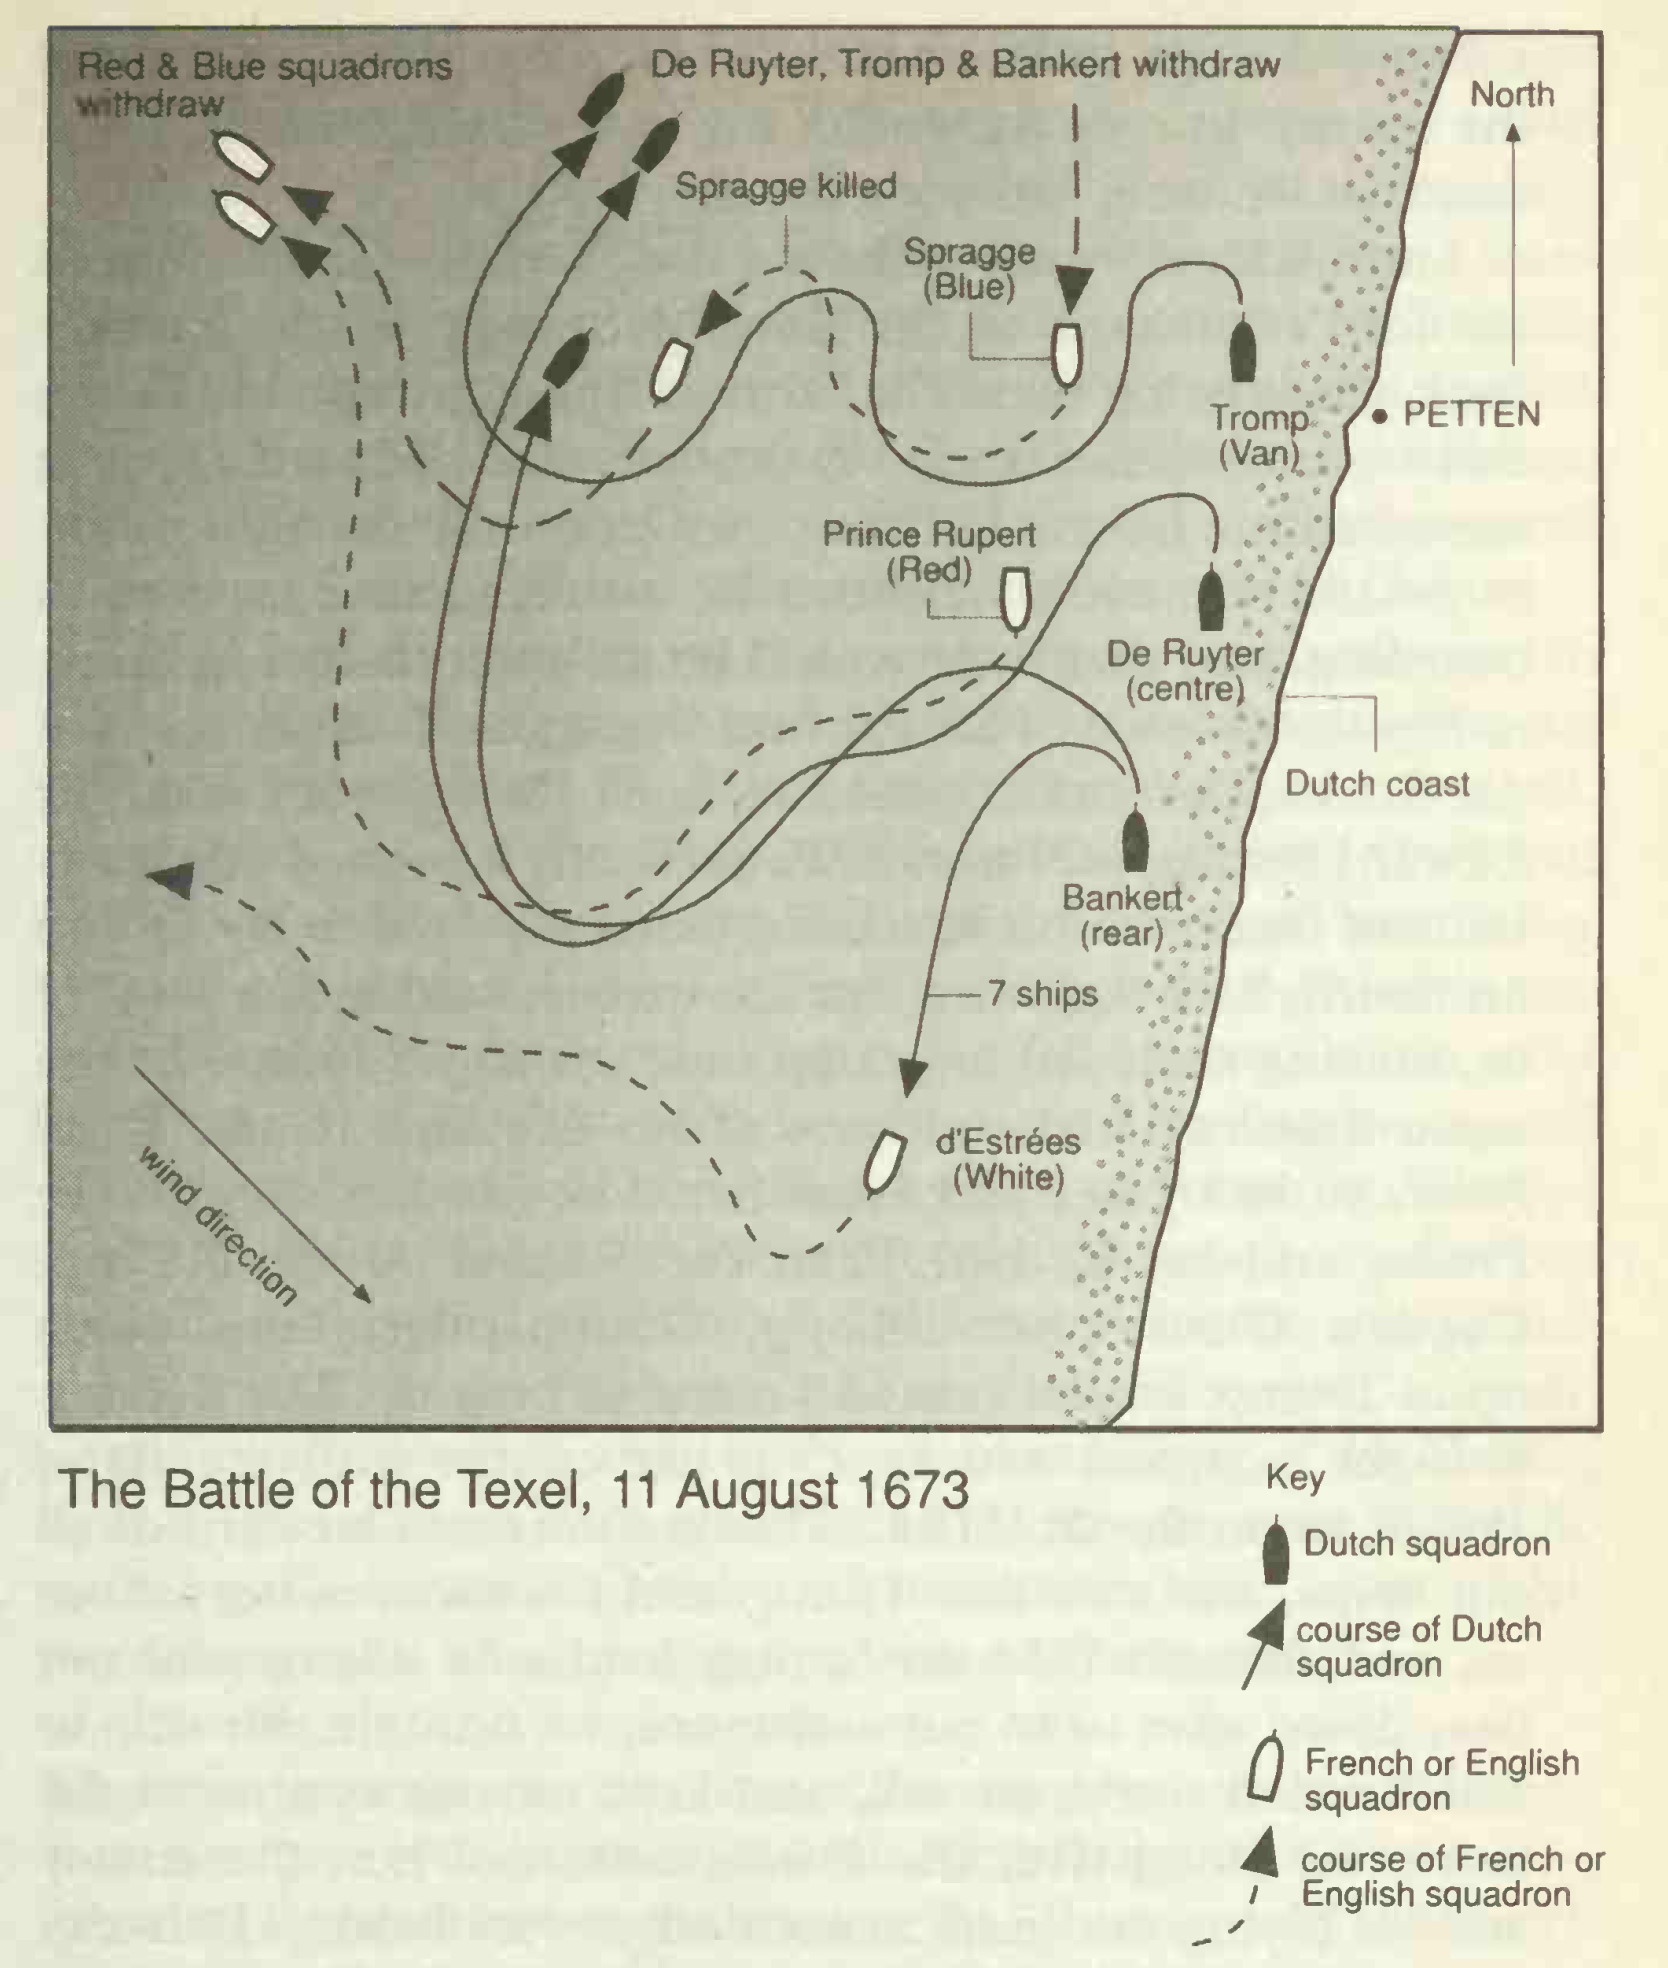 1706460532 959 The Battle of the Texel 11 August 1673